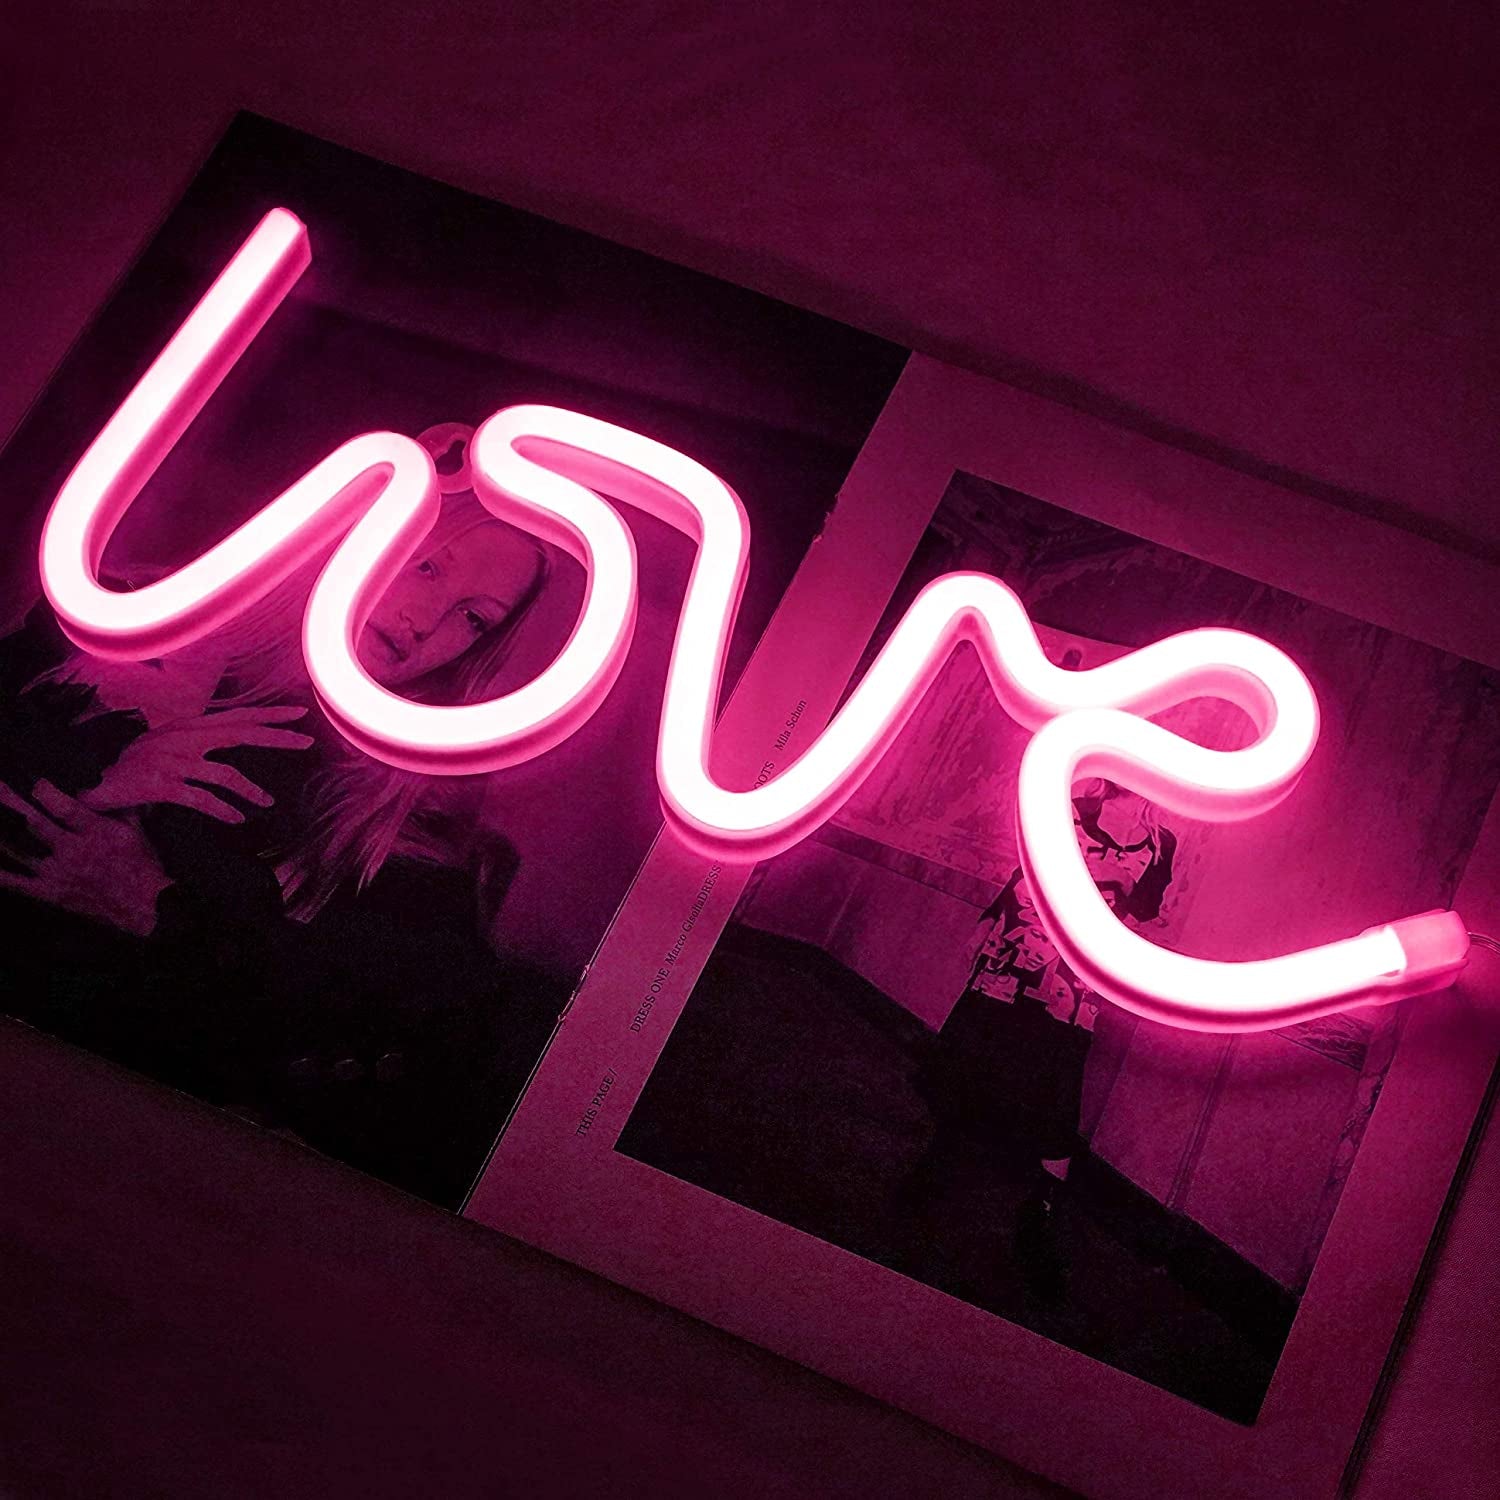 Love Neon Light, Cute Neon Love Sign, Battery or USB Powered Night Light as Wall Decor for Kids Room, Bedroom, Festival, Party (Pink)